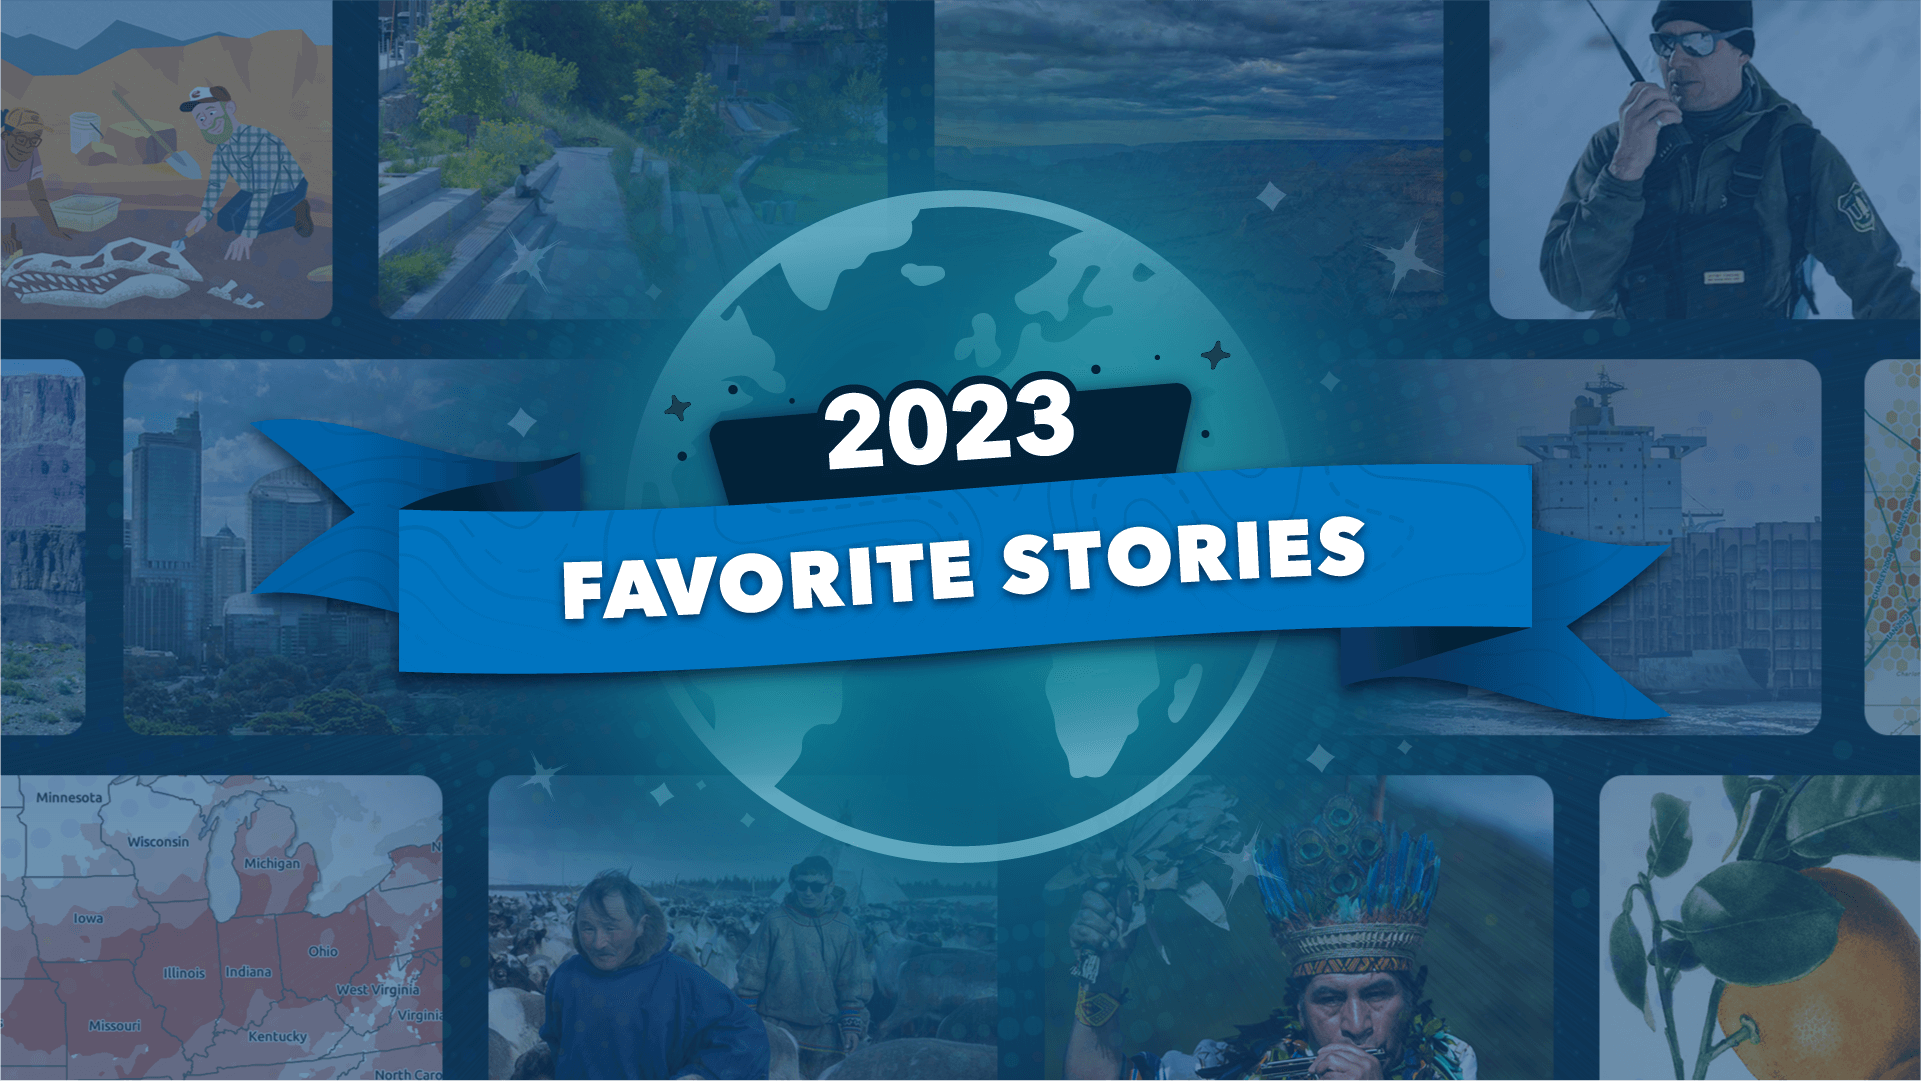 A collage of story images with "2023 Favorite Stories" written on top